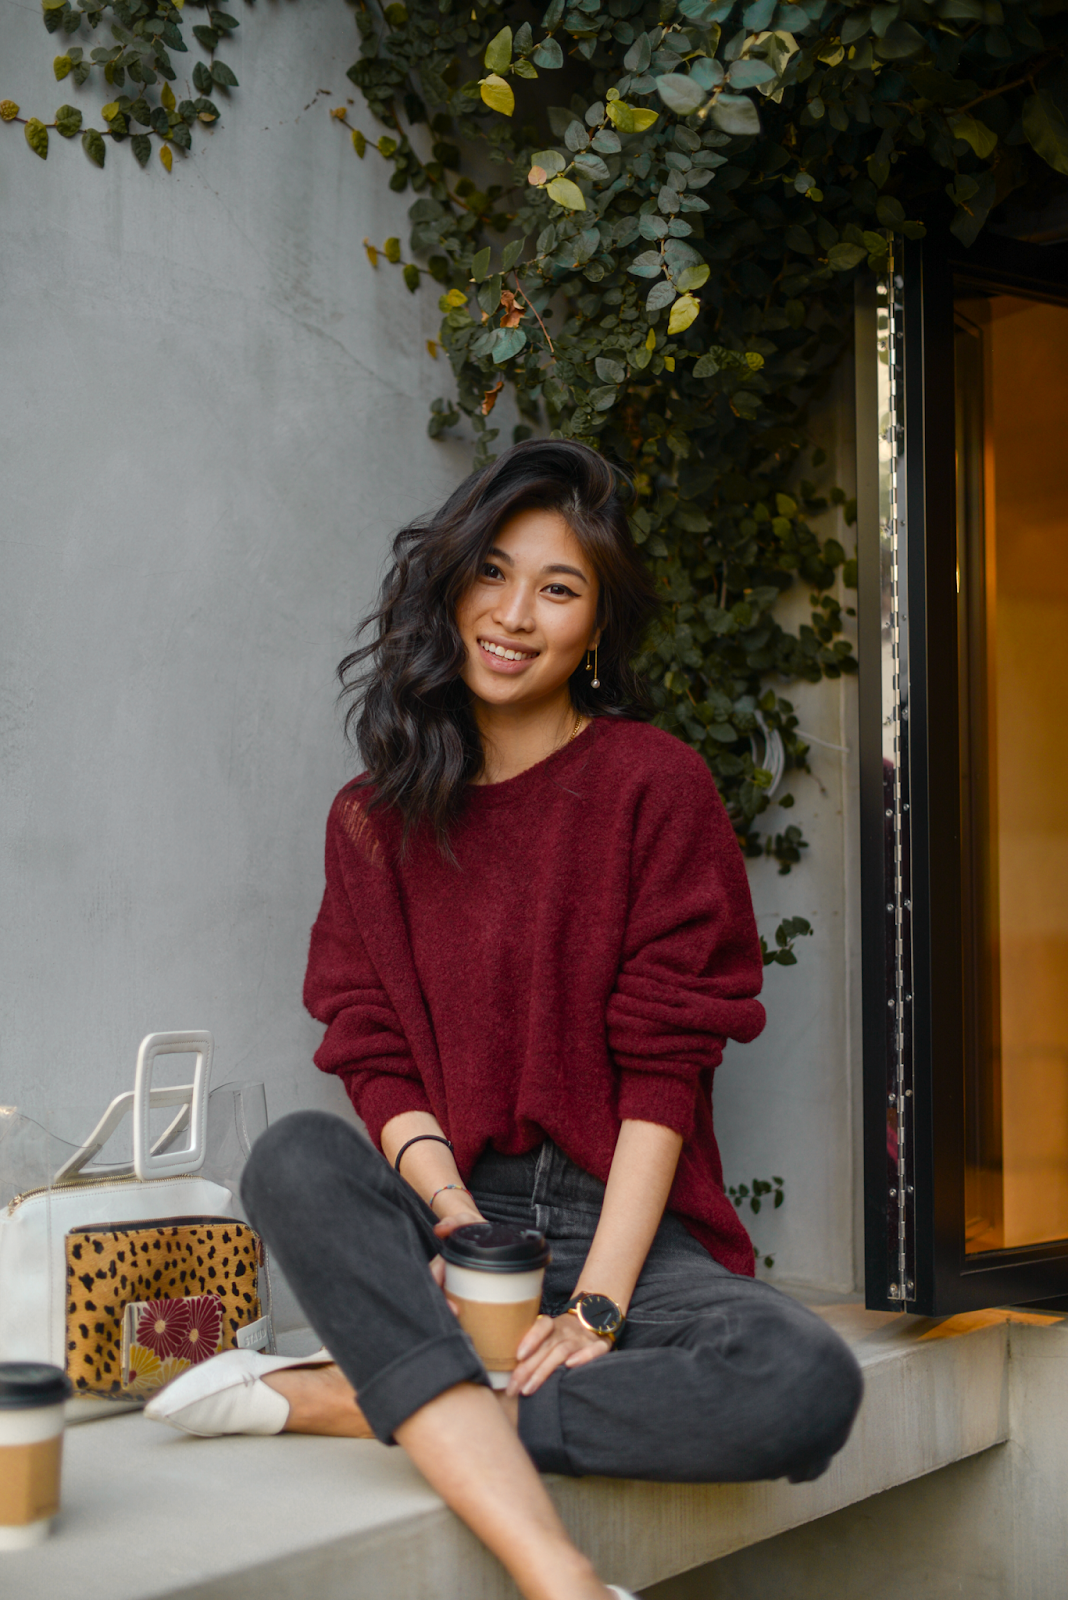 Maroon sweater, simple winter outfit, PVC handbag, simple way to style color for fall, tokyo style, Nicholas Kirkwood flats, self portrait fashion blogger photos, FOREVERVANNY Style, Tokyo and New York Fashion Blogger, Van Le Fashion Blog - December Again / 122018